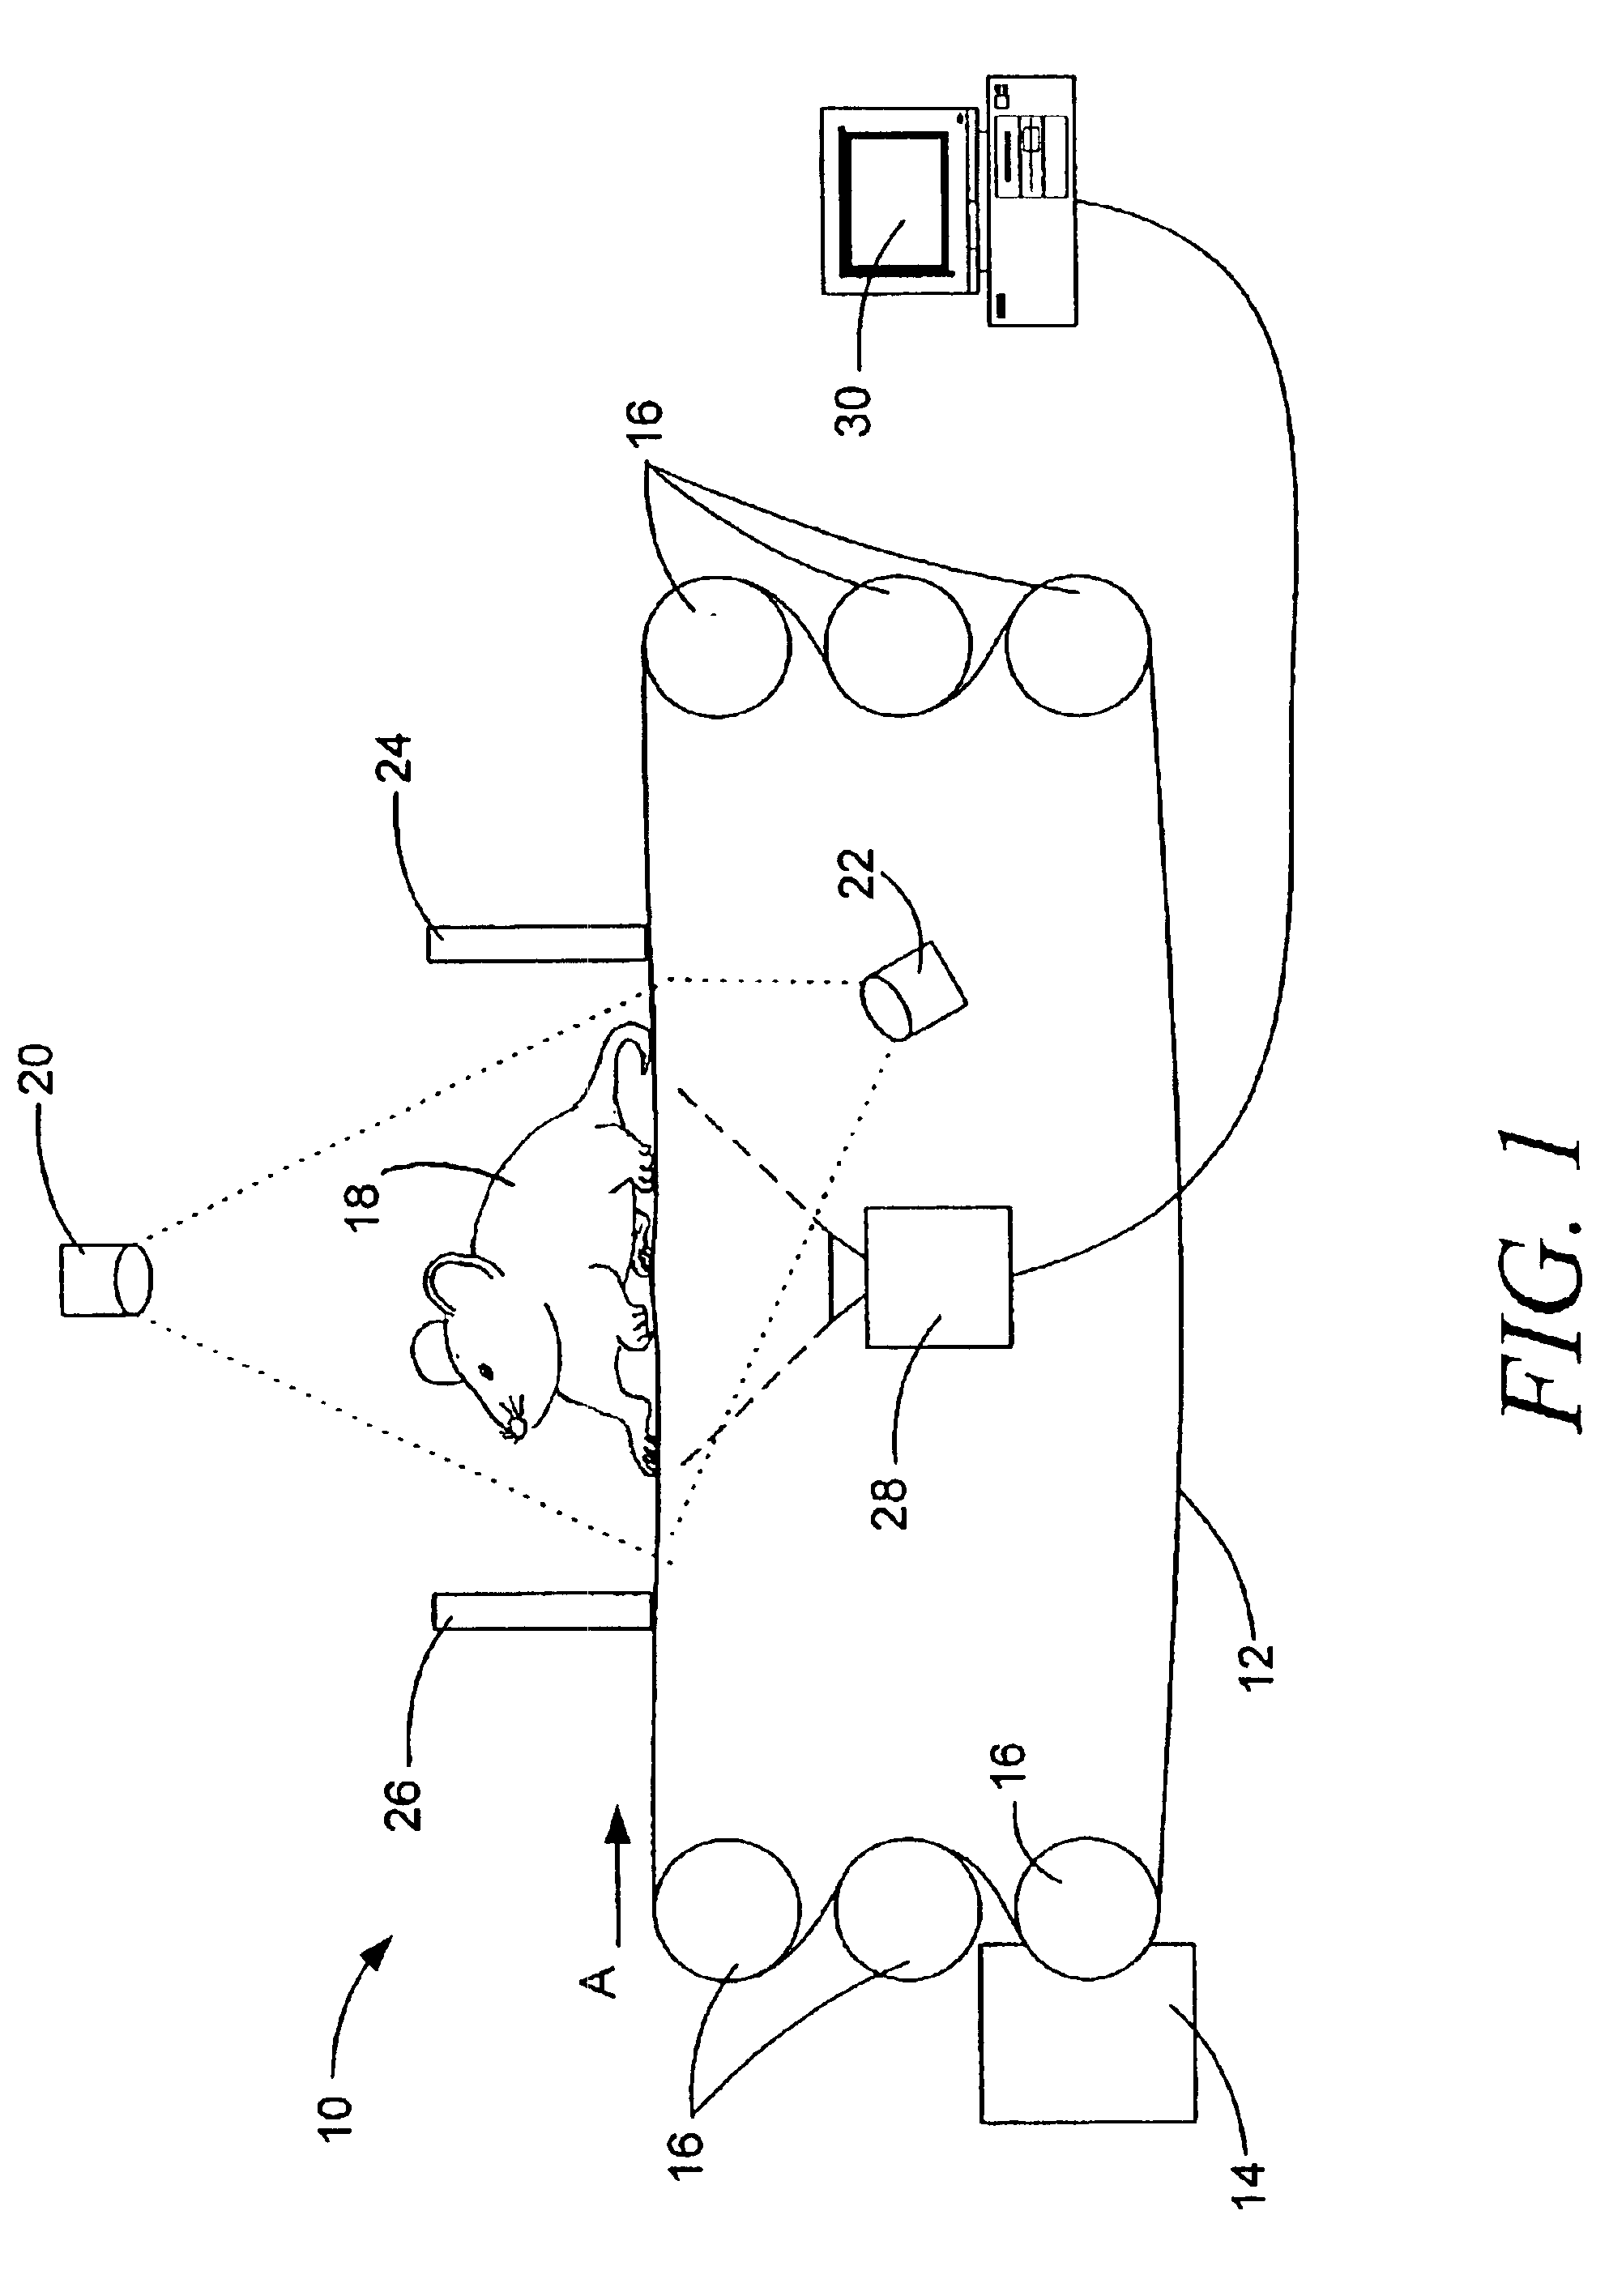 Method and apparatus for monitoring locomotion kinematics in ambulating animals